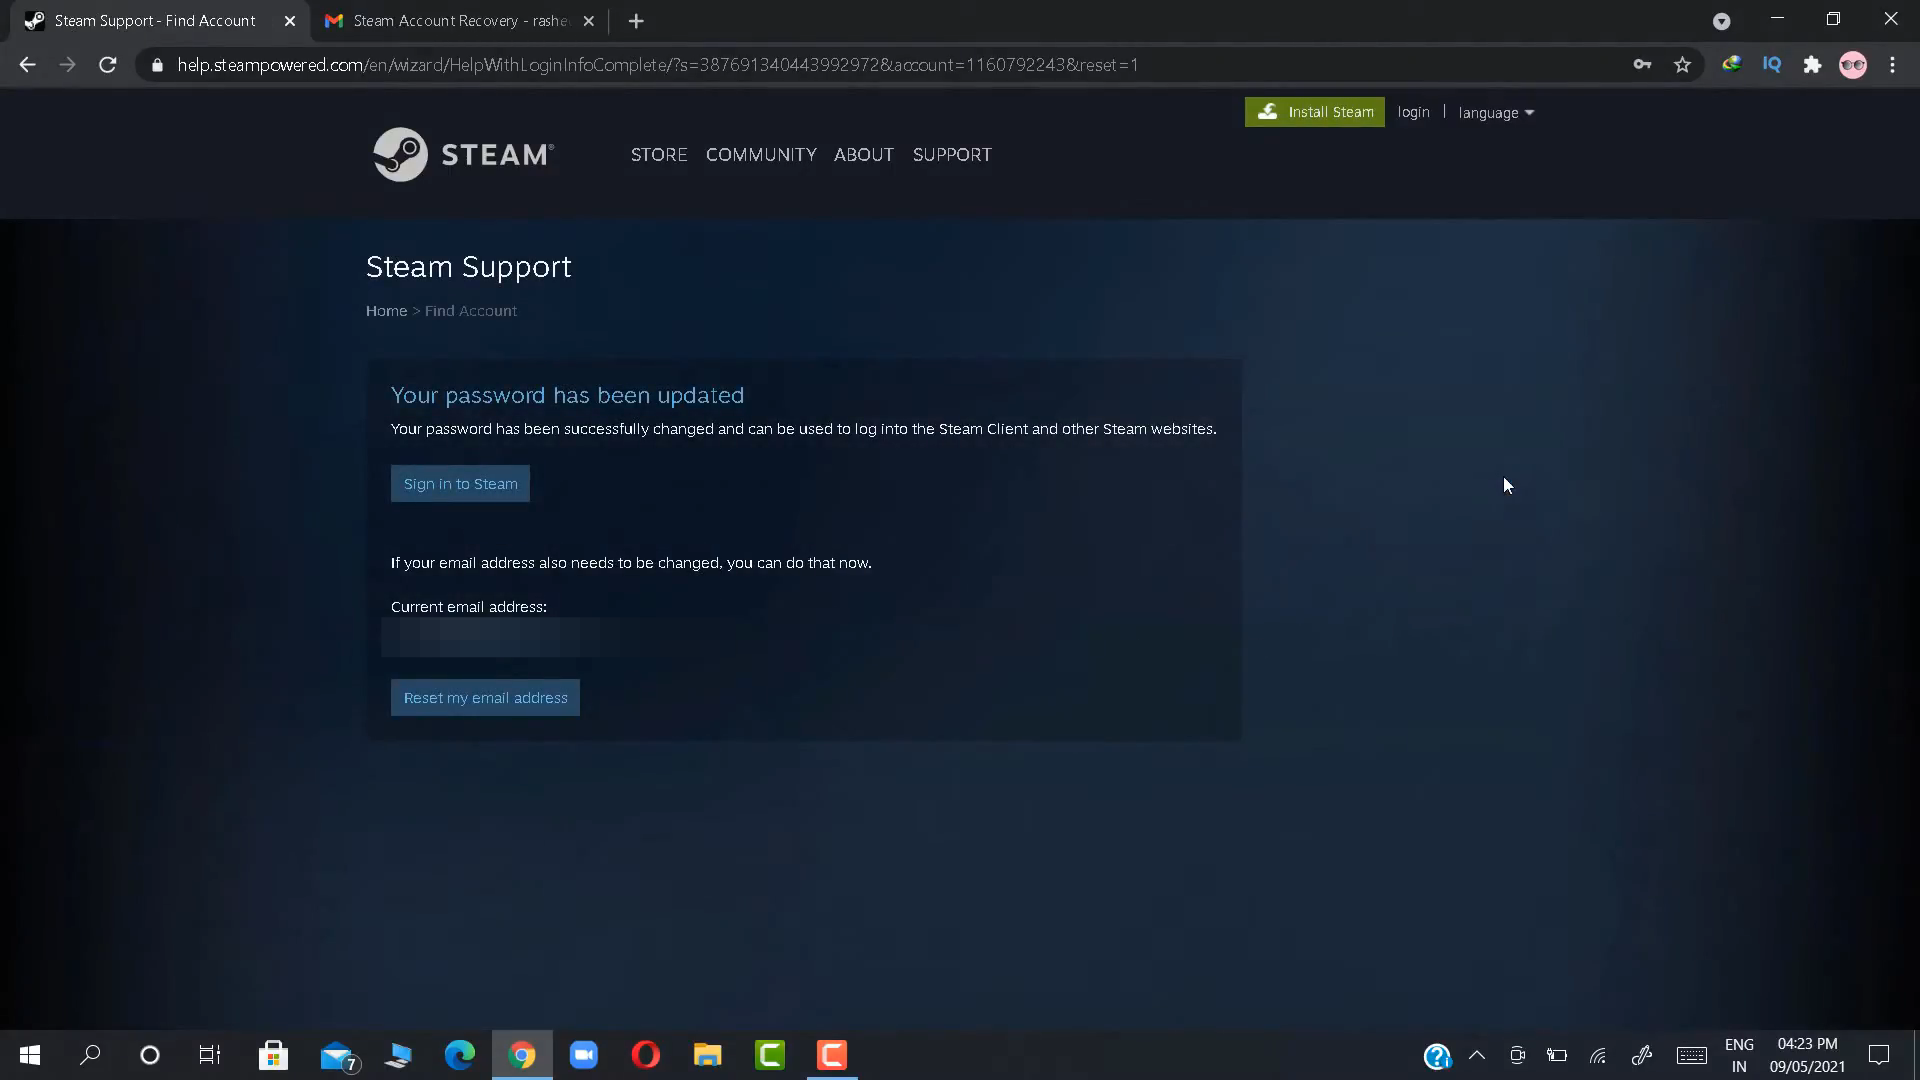 In the next page it will confirm that your password is changes and you can log into the steam account.